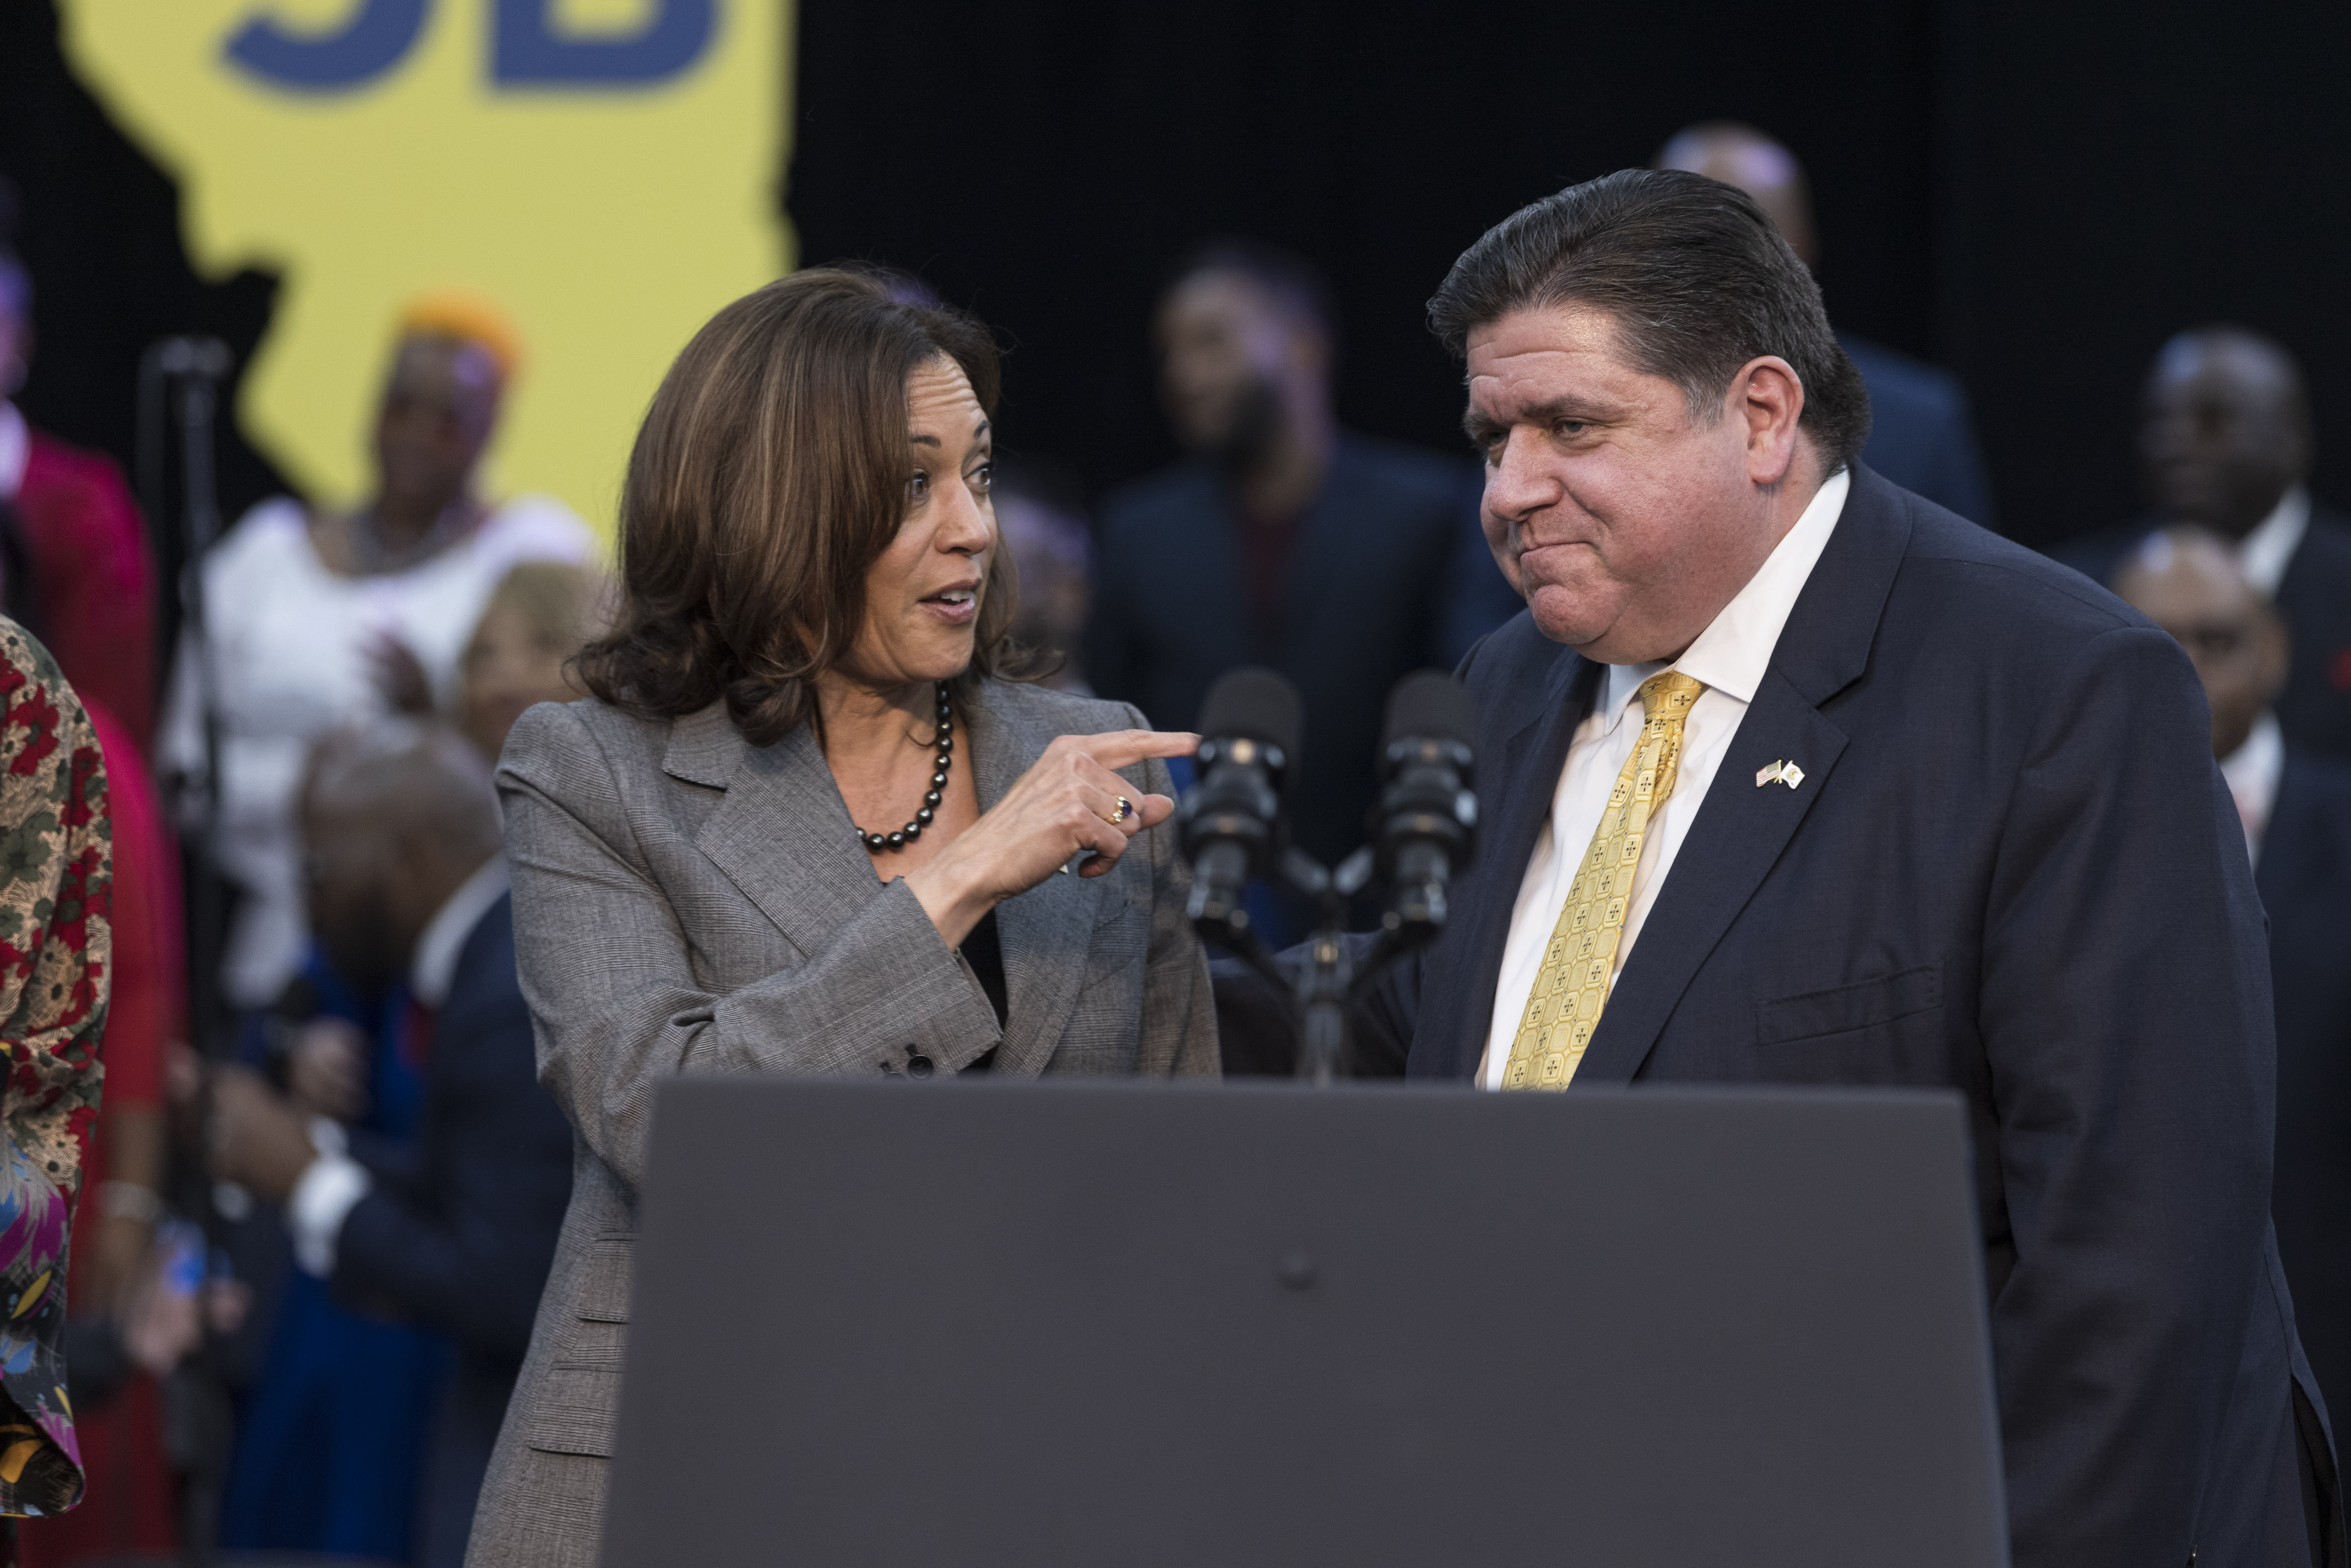 Afternoon Edition: Top Dems join chorus for Kamala Harris as president